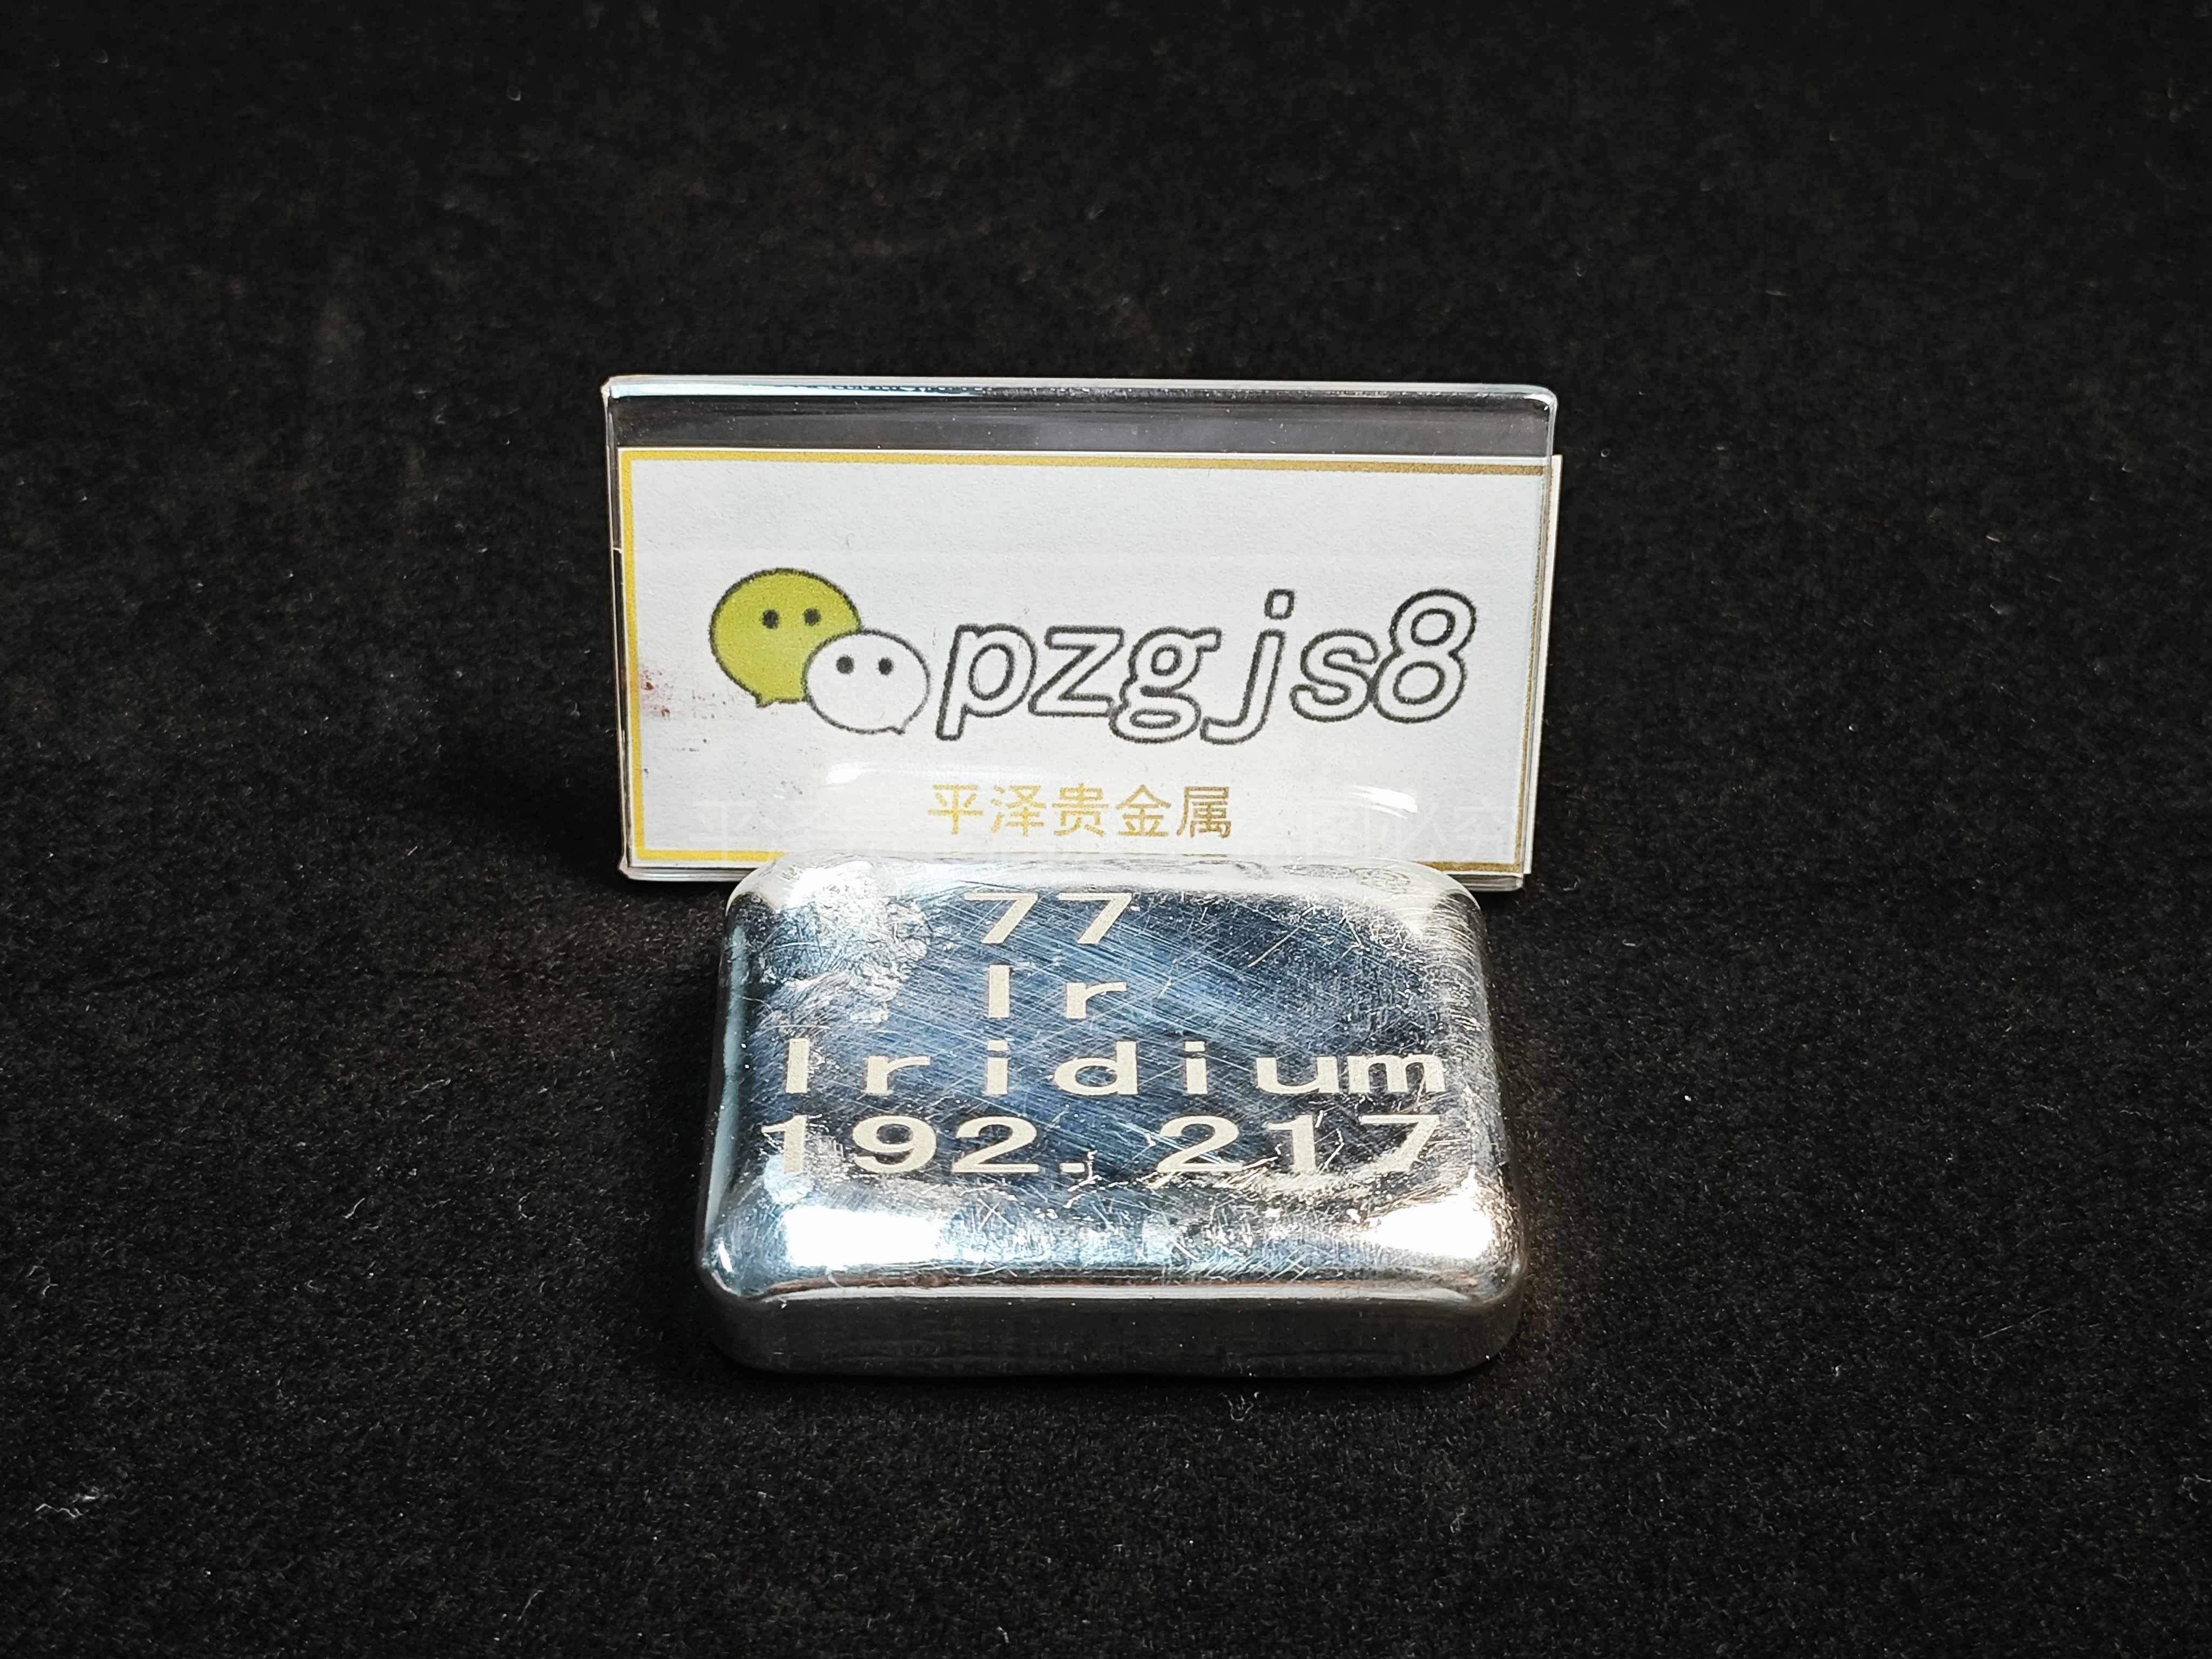 I have iridium scrap, care about the price of iridium, how to find a company to recycle iridium metal